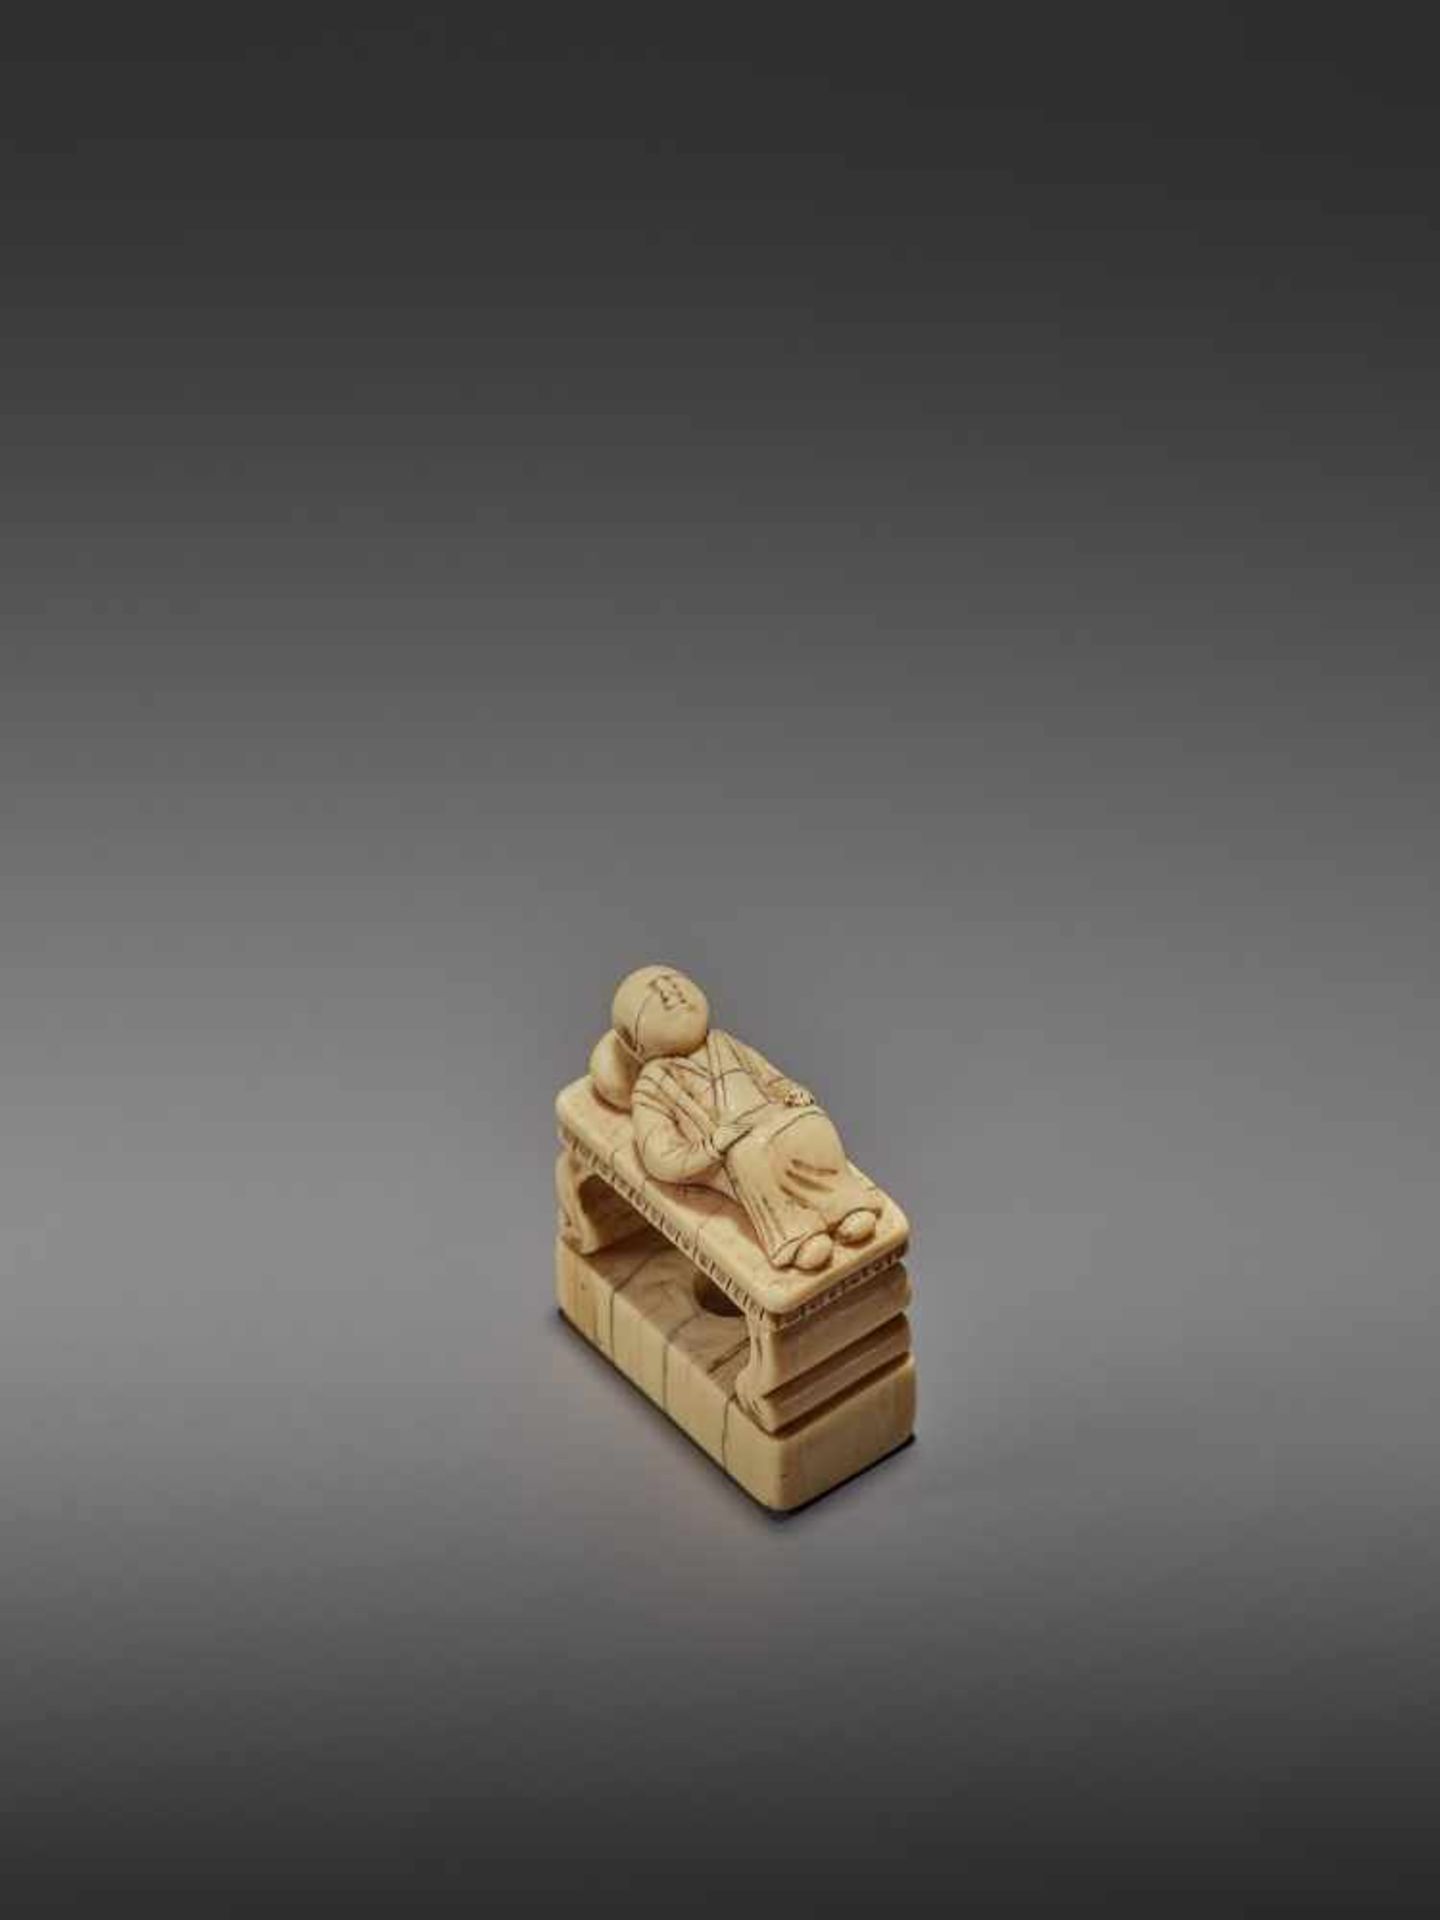 AN EARLY IVORY NETSUKE OF A CHINESE MAN SLEEPING ON AN OPIUM BED UnsignedJapan, early 18th - Bild 7 aus 11